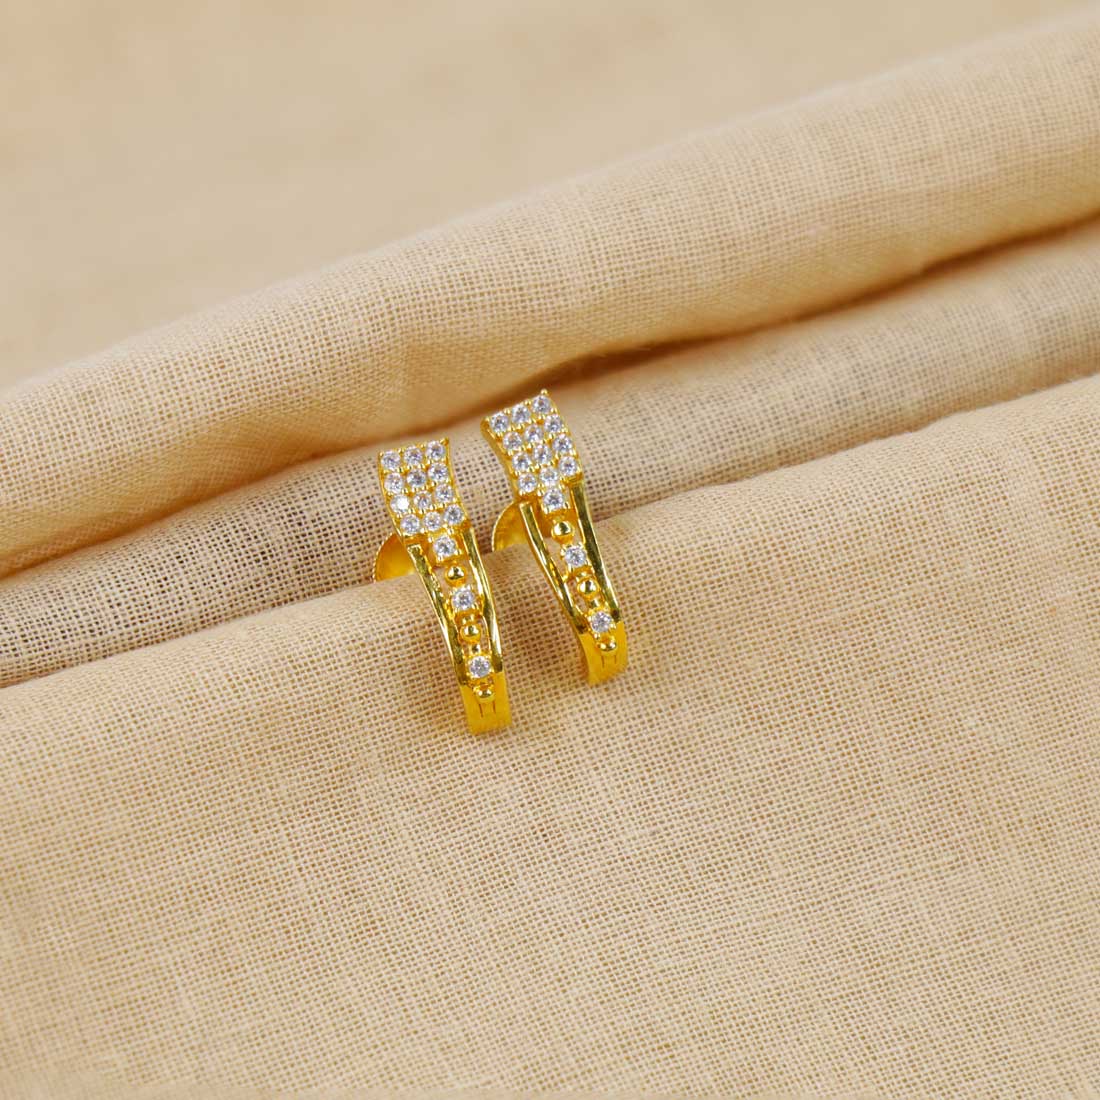 New Design Uniqued J Shaped Stud Earrings With Clear Bling CZ Bar And Micro  Pave For Women Whole Gold Plated Dainty Jewelry From Ivumj, $13.41 |  DHgate.Com